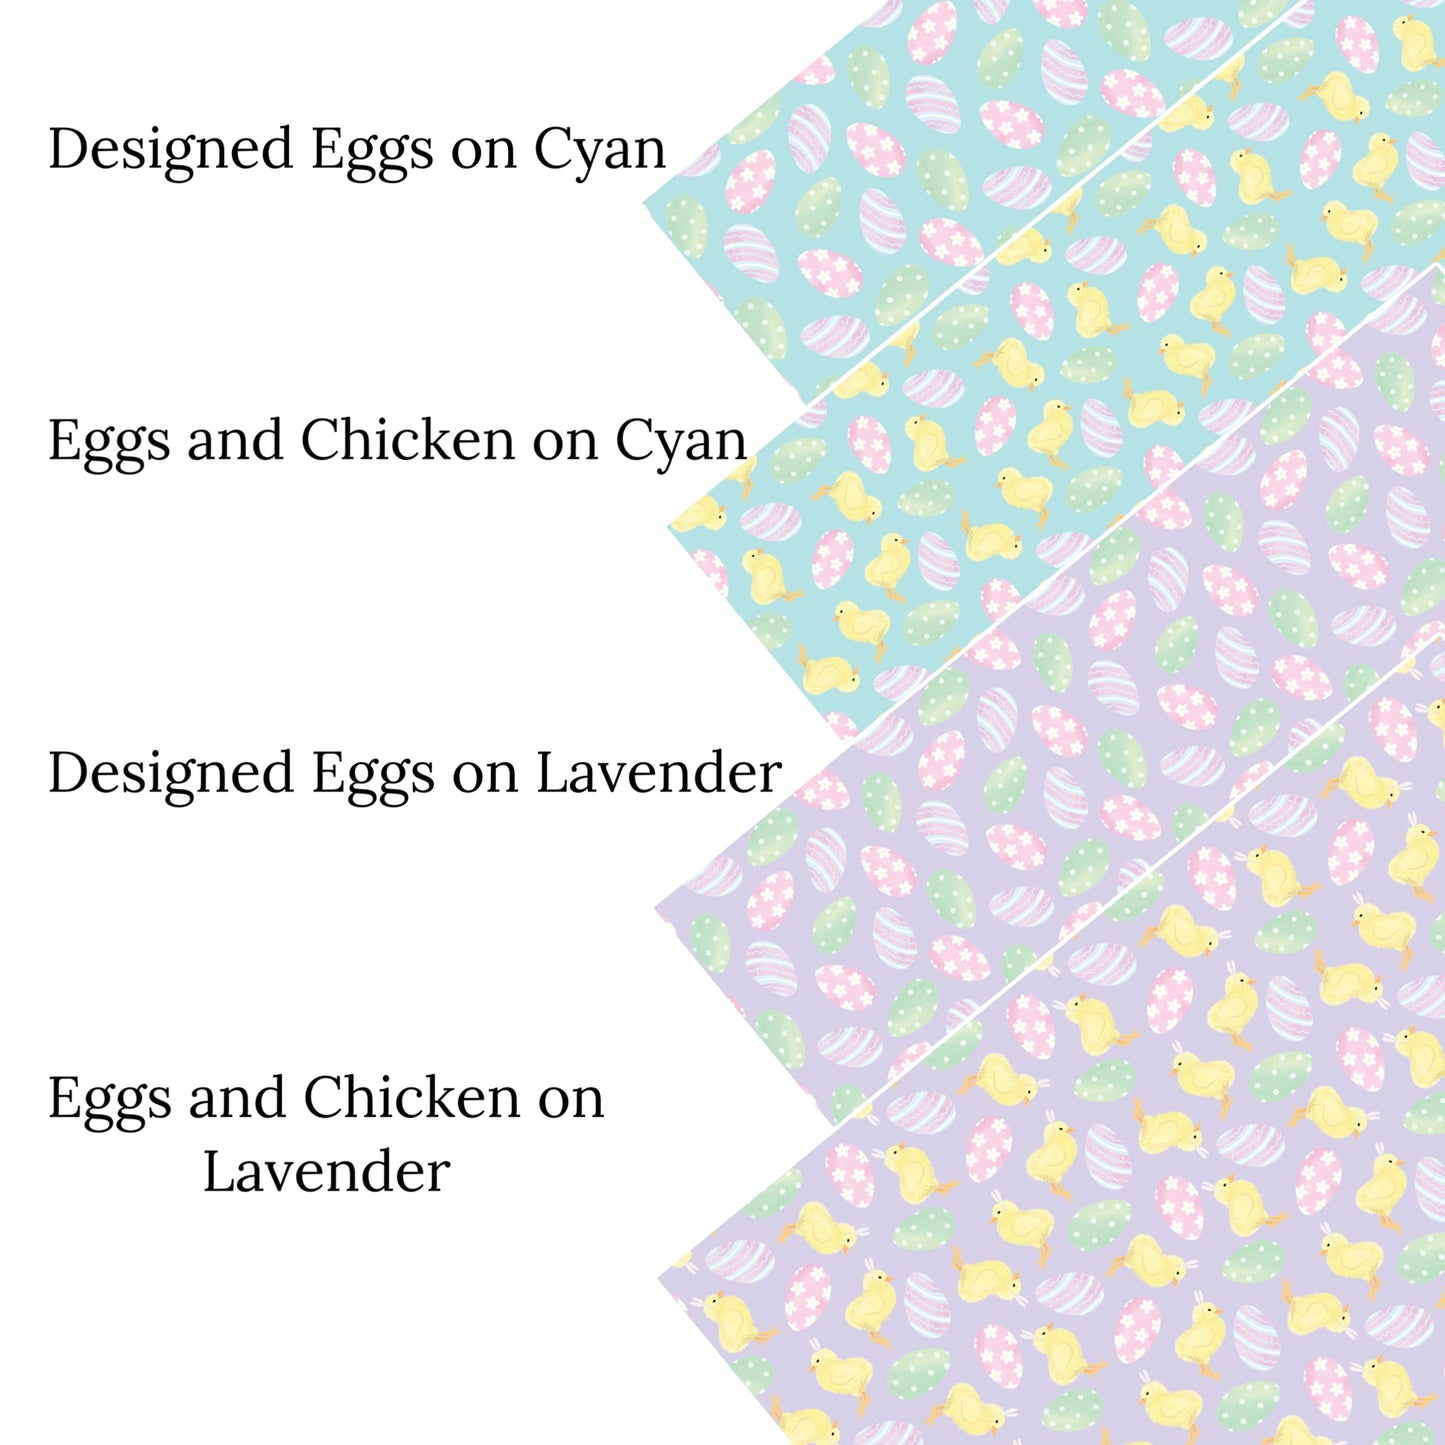 Designed Eggs on Lavender Faux Leather Sheets